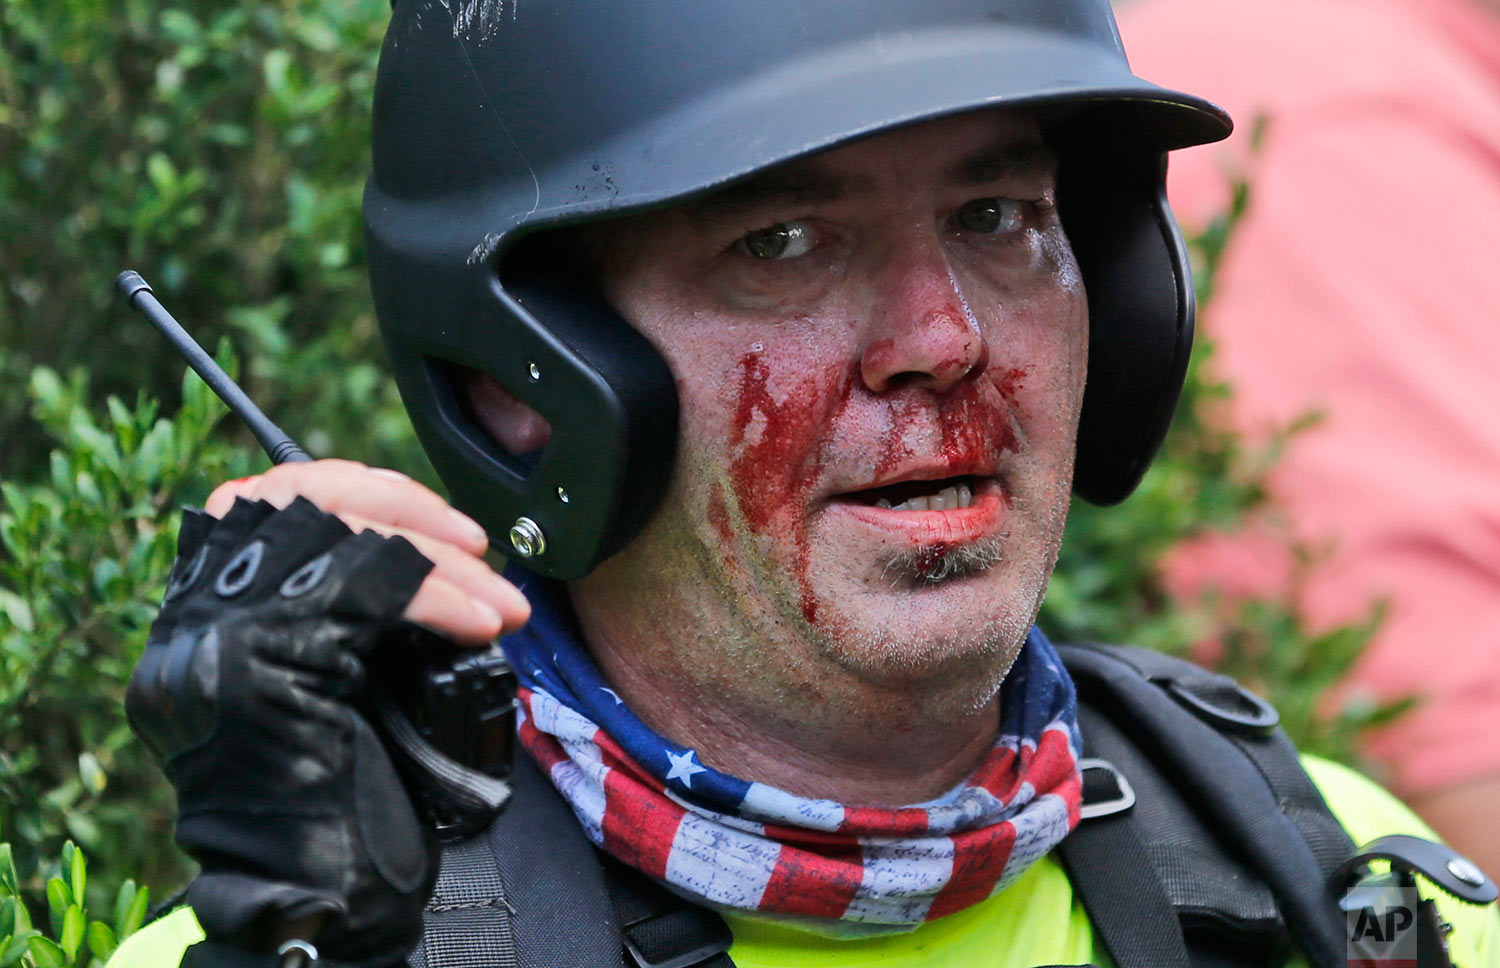  A white nationalist demonstrator, bloodied after a clash with a counter demonstrator,  talks on the radio receiver at the entrance to Lee Park in Charlottesville, Va., Saturday, Aug. 12, 2017. Gov. Terry McAuliffe declared a state of emergency and p